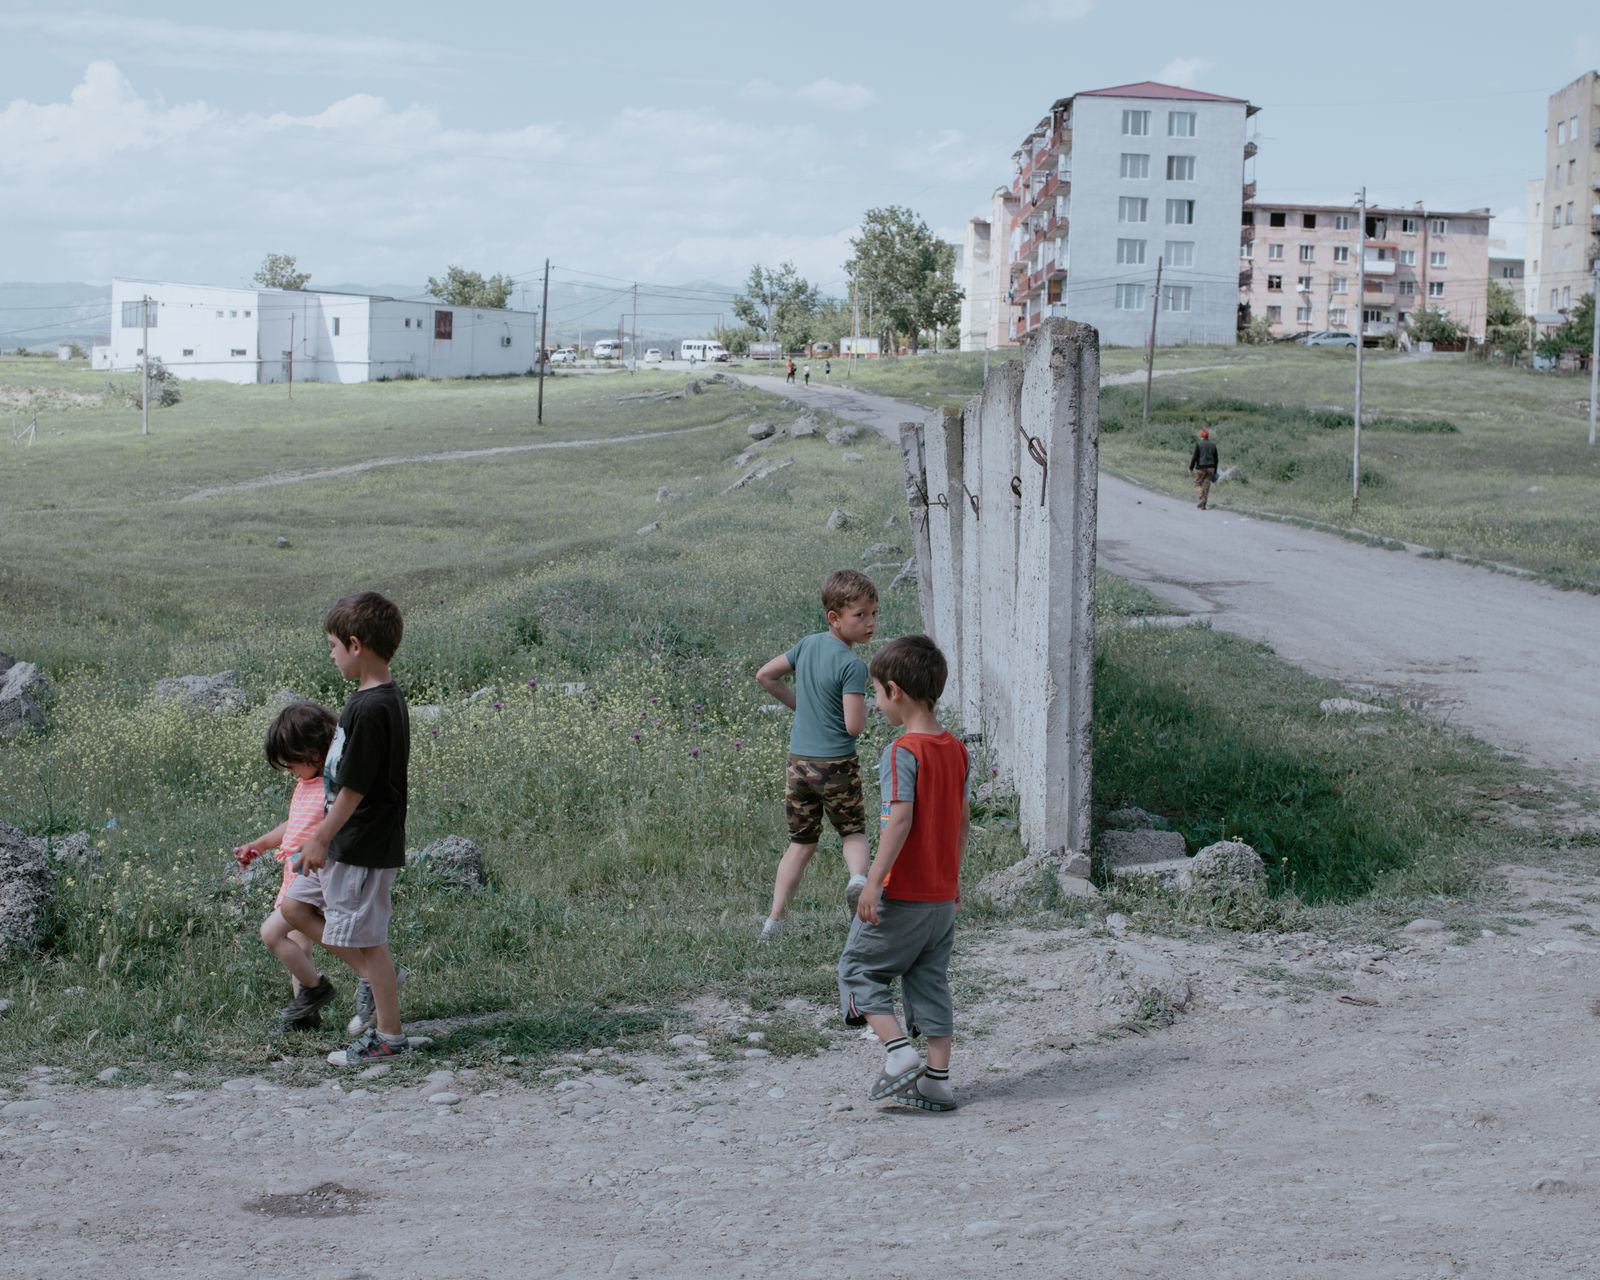 © Jana Islinger - Image from the Droa - Georgia on the move photography project